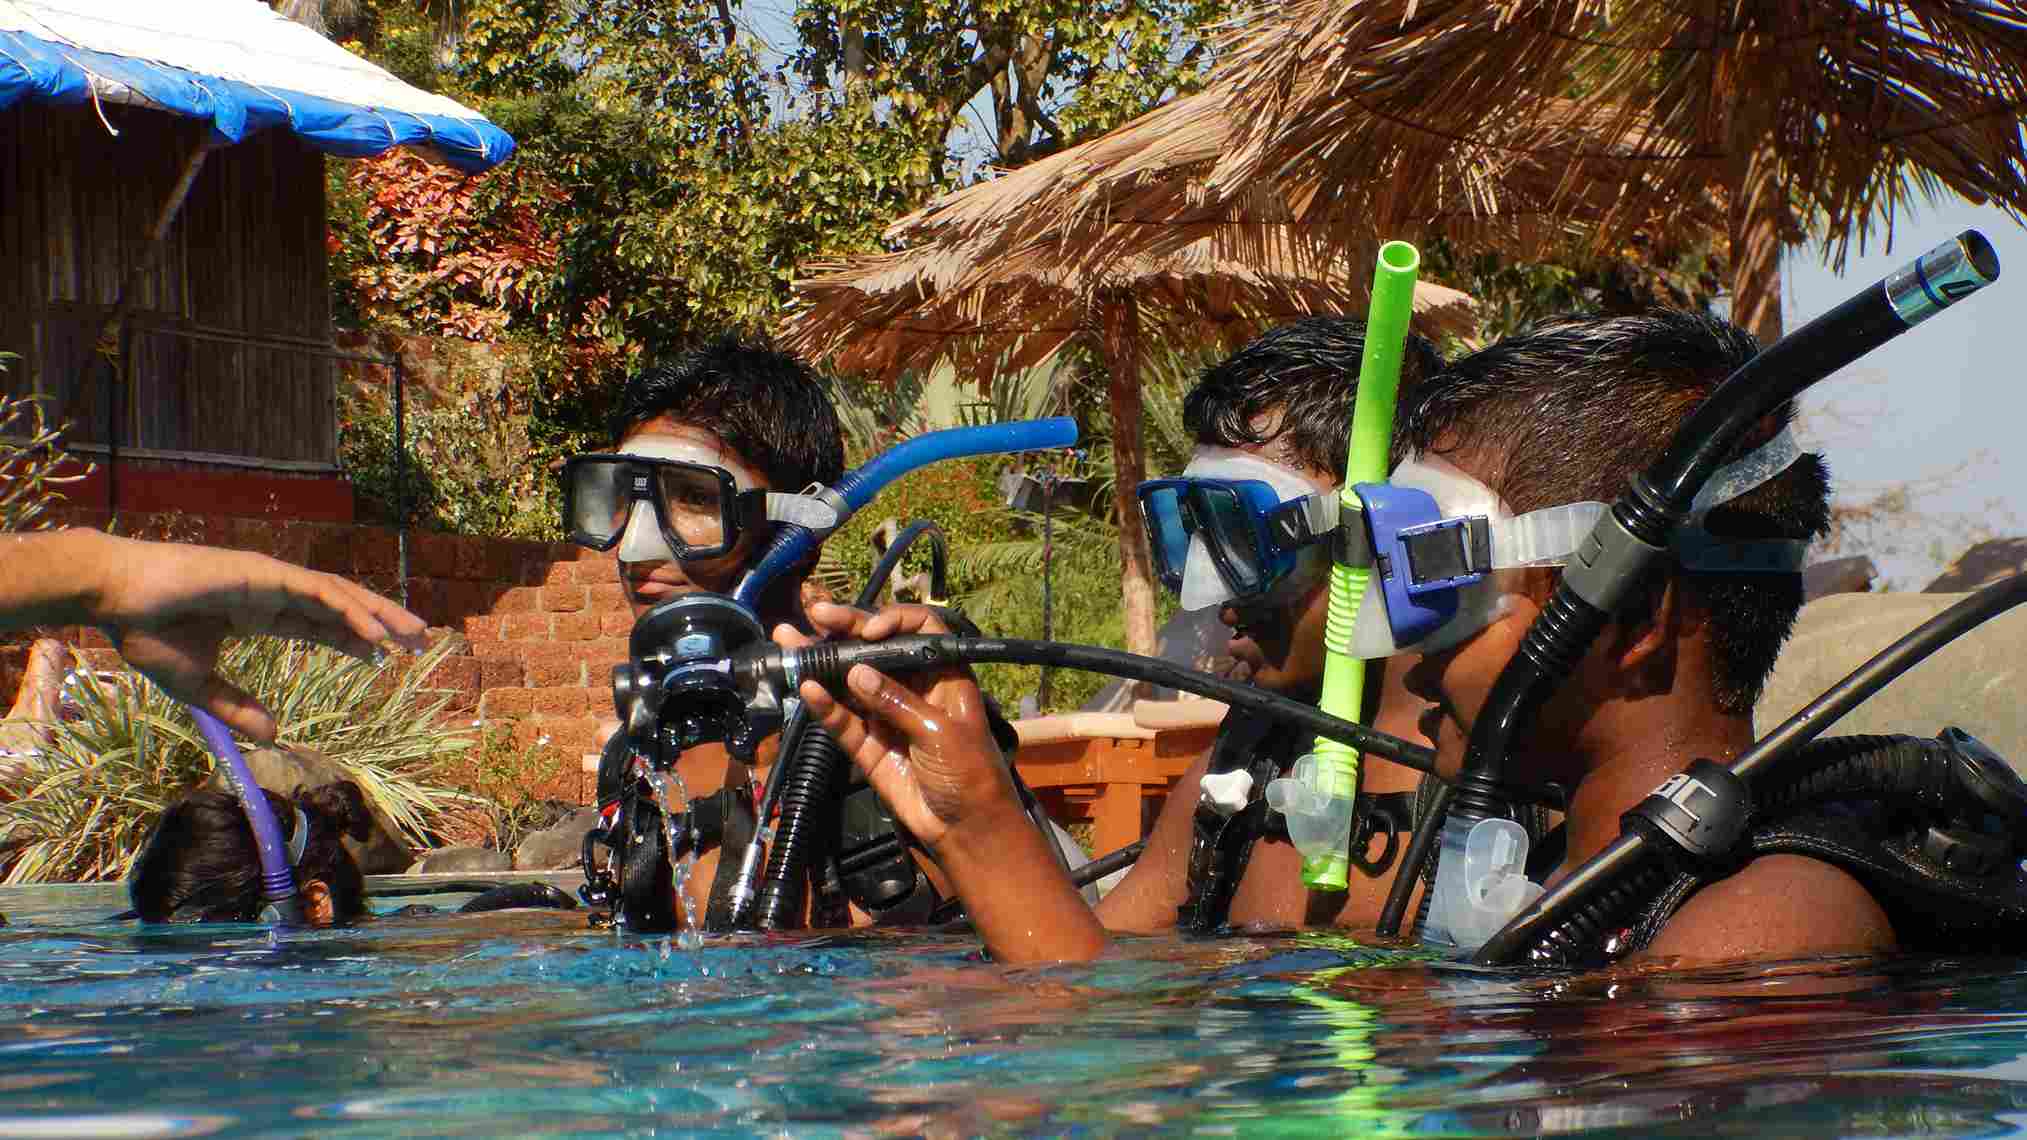 The diving centre trains internationally certified divers